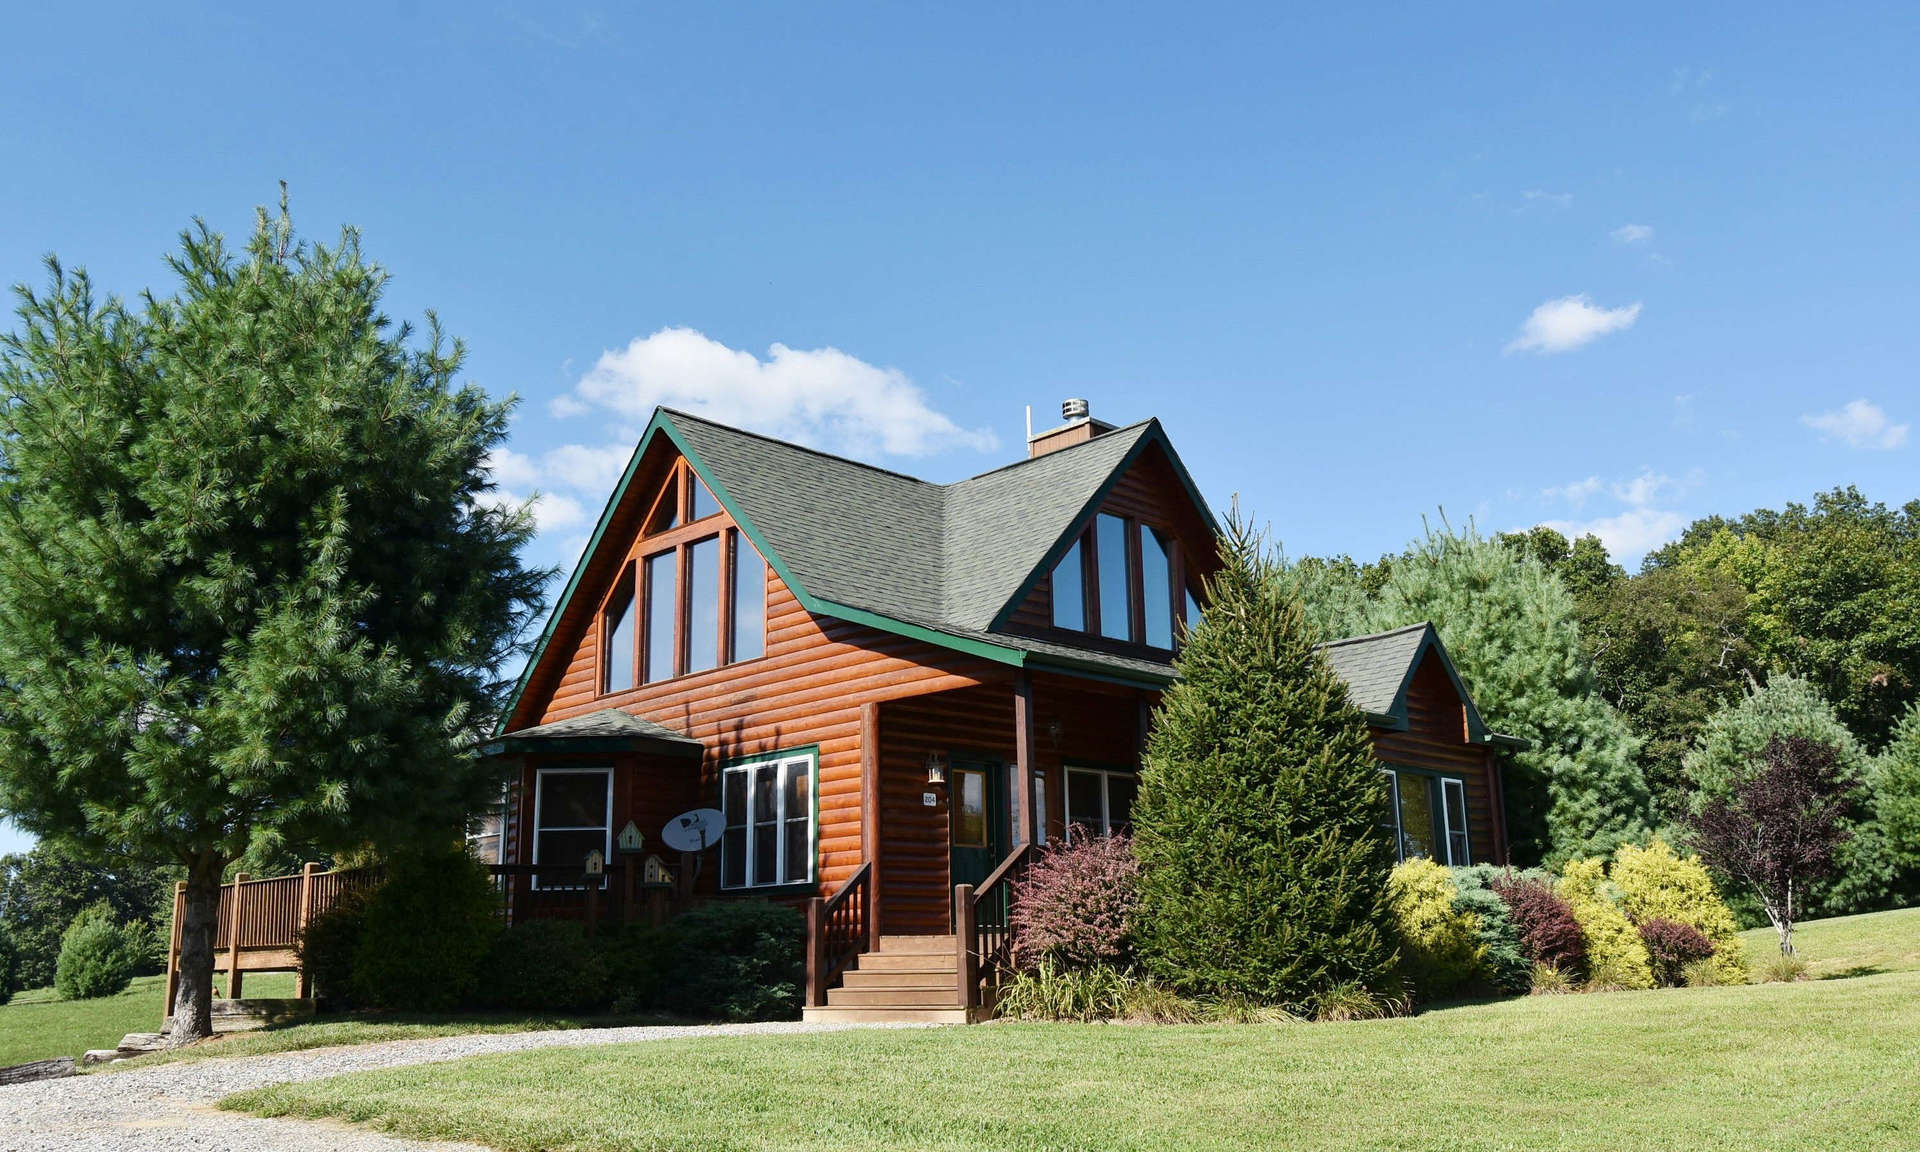 THE PERFECT CABIN! Enjoy gorgeous views from the decks and almost every window in this 3-bedroom, 3.5-bath home nestled in on a beautiful 1.47 acre setting in the Bear Creek community close to Sparta in Alleghany County, NC.